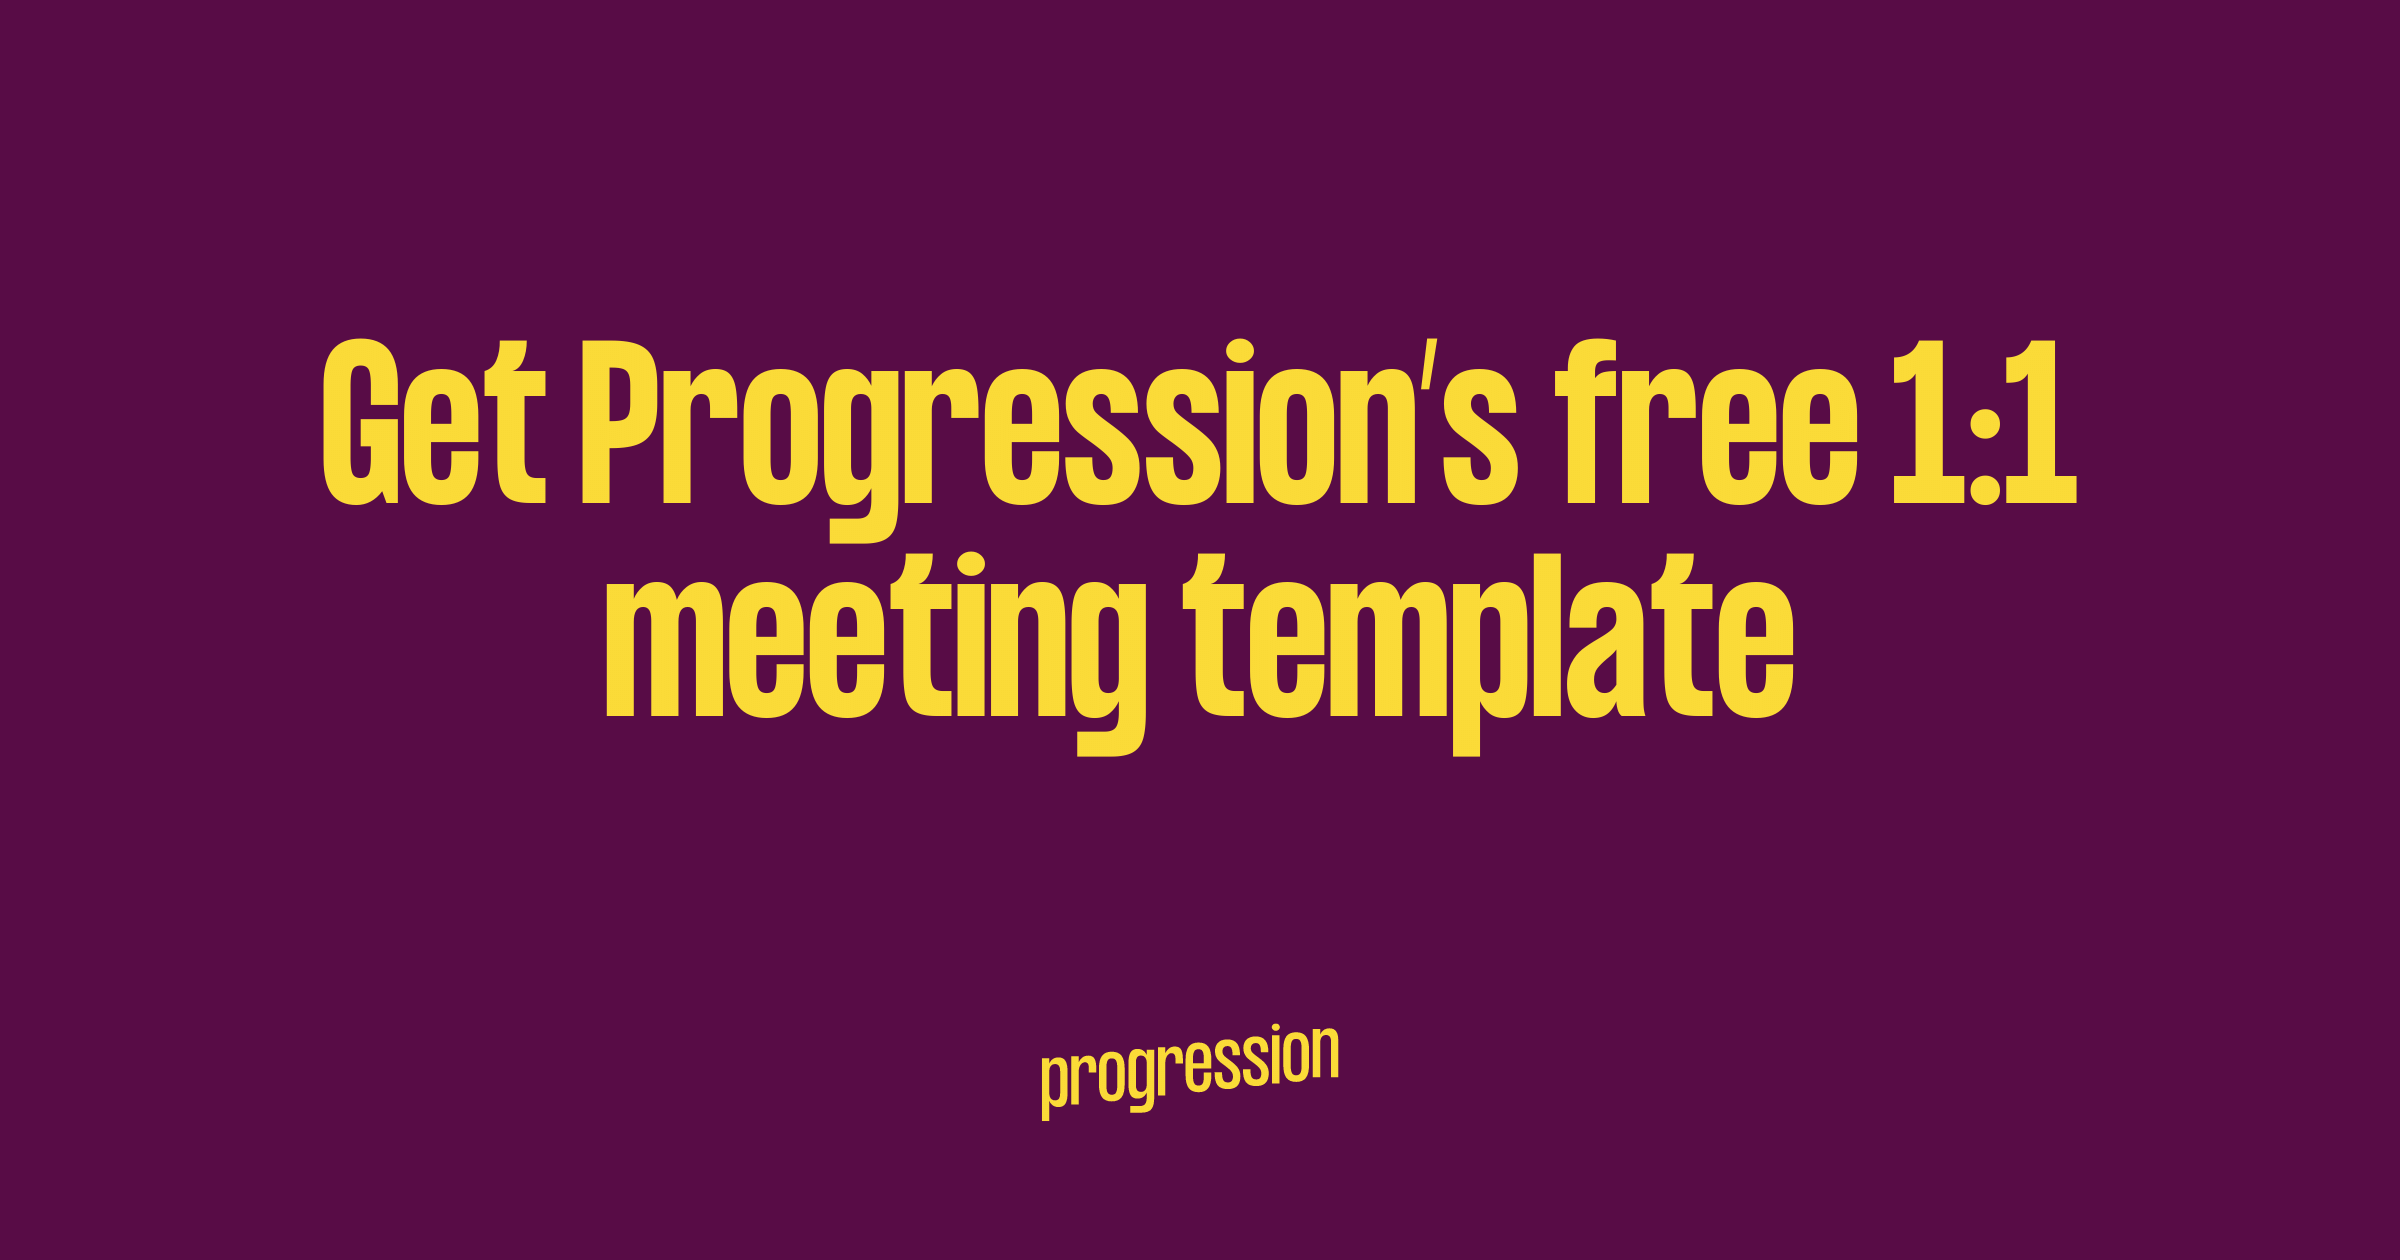 Get Progression's free 1:1 meeting template